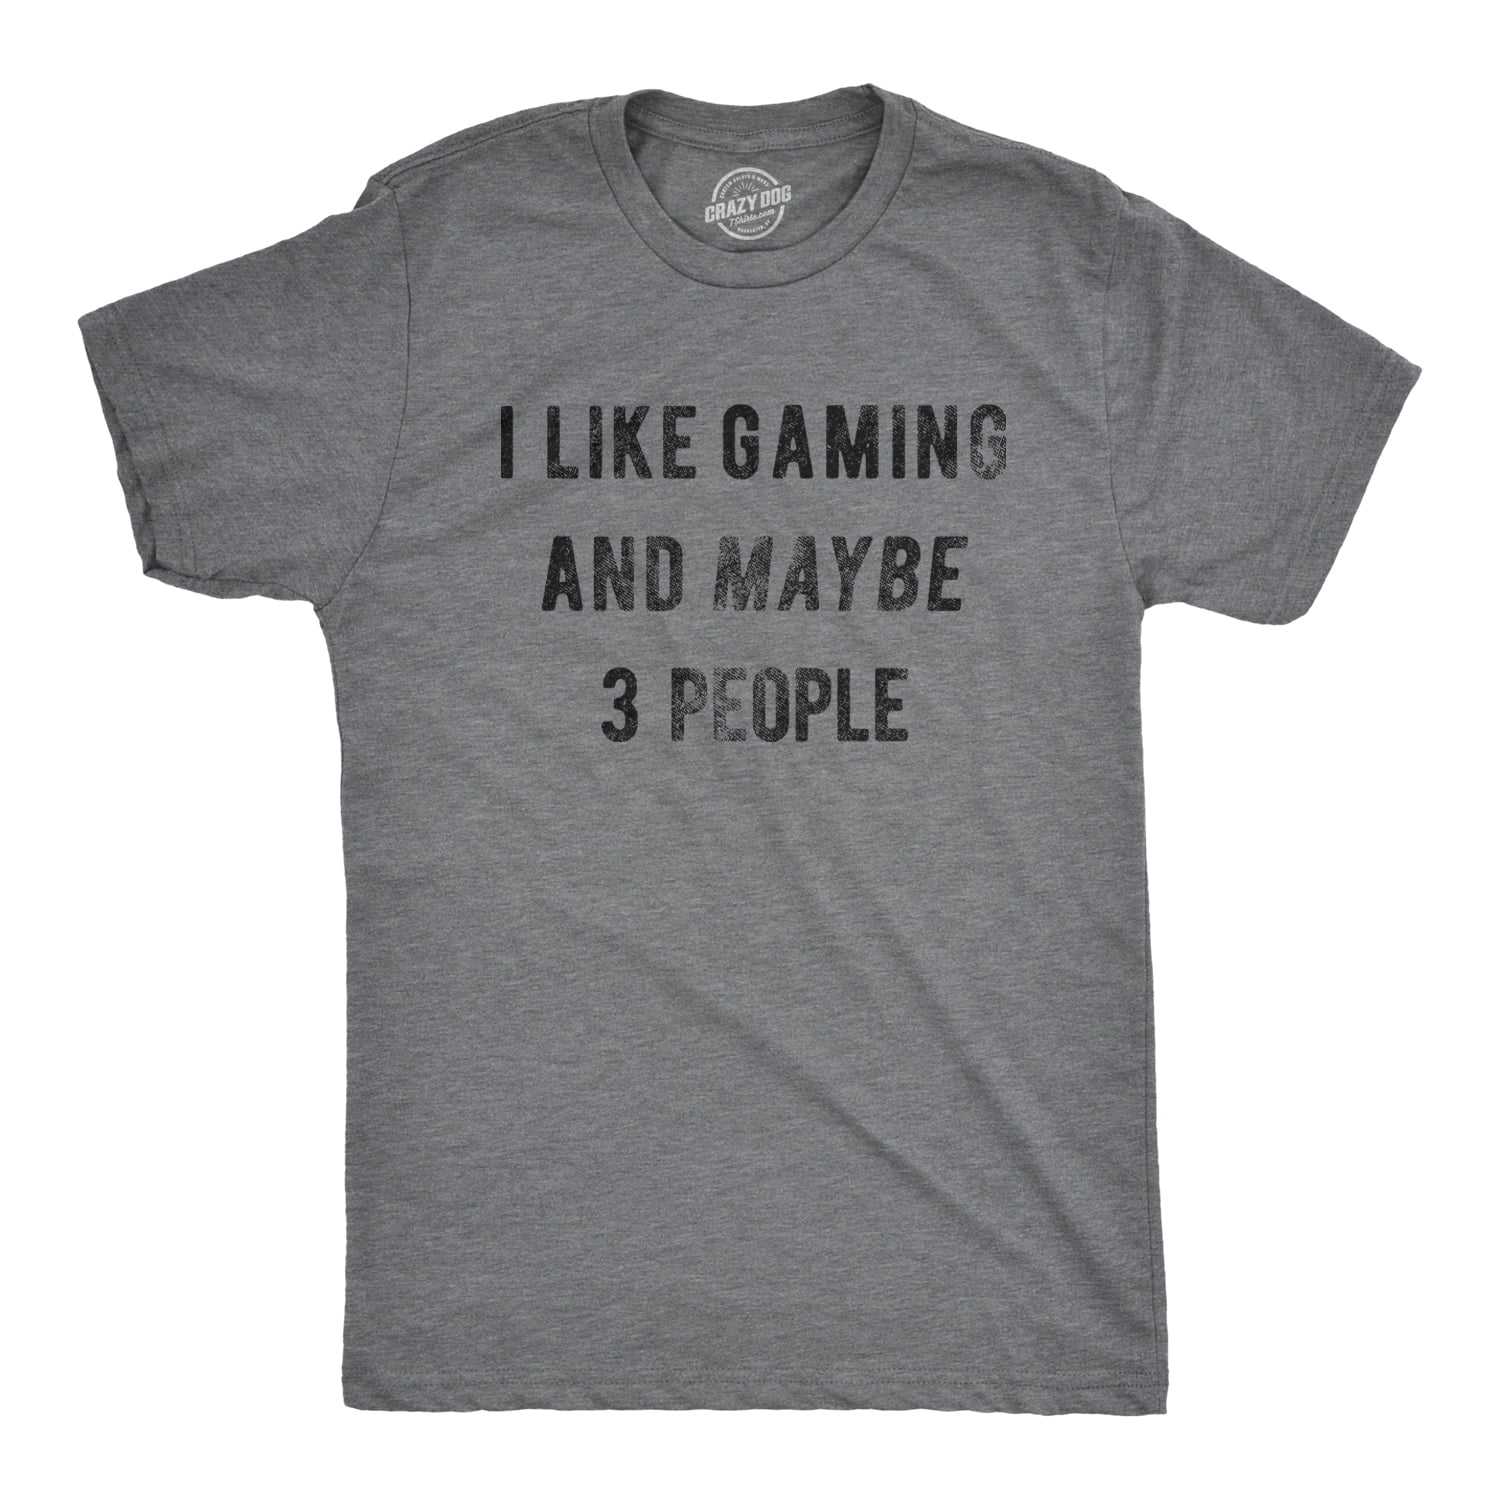 Mens I Like Gaming And Maybe 3 People T shirt Funny Video Gamer Gift Cool  Gaming (Dark Heather Grey) - XXL Graphic Tees 